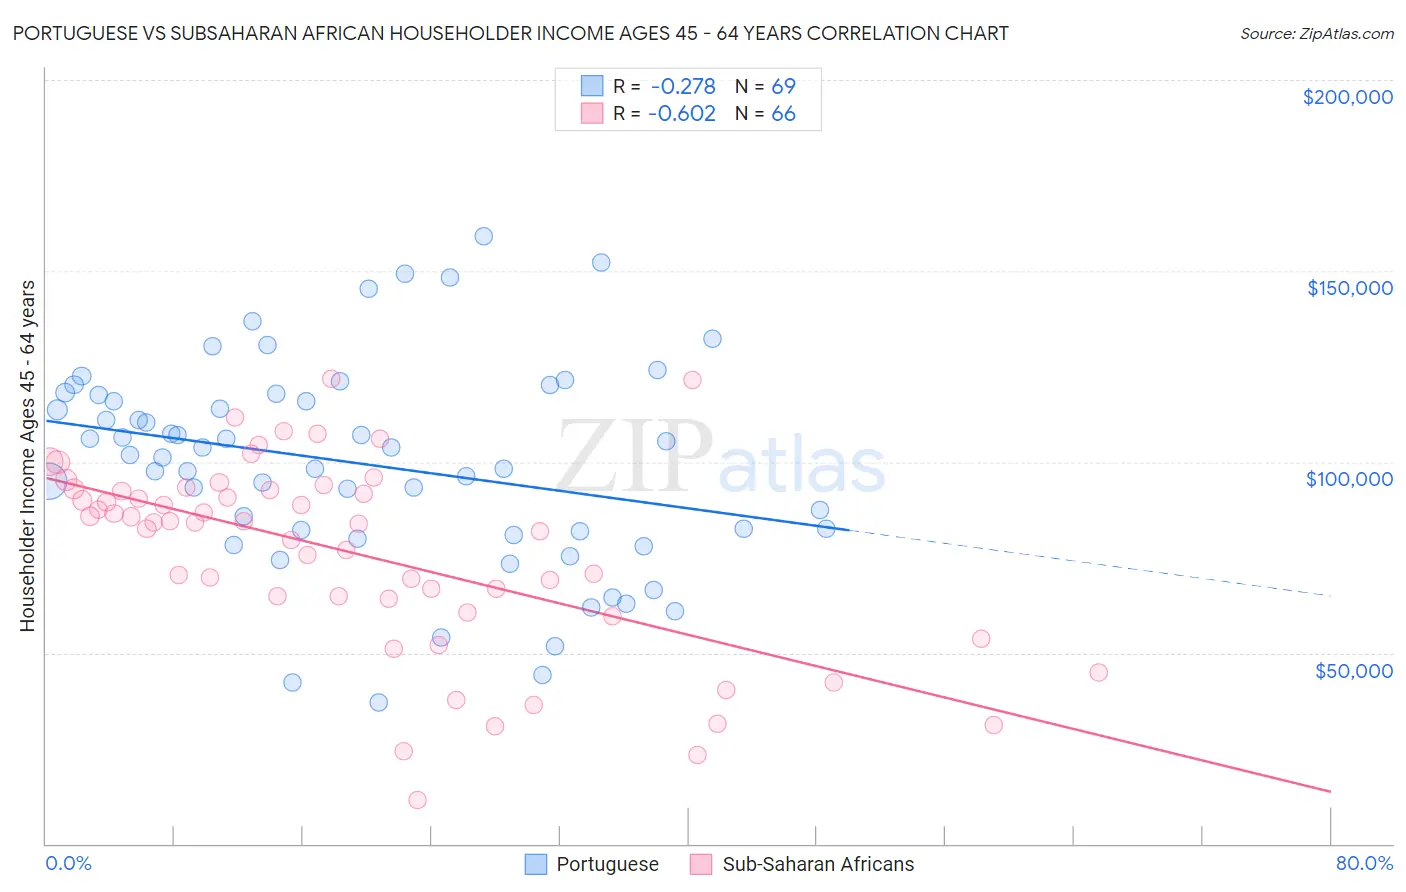 Portuguese vs Subsaharan African Householder Income Ages 45 - 64 years